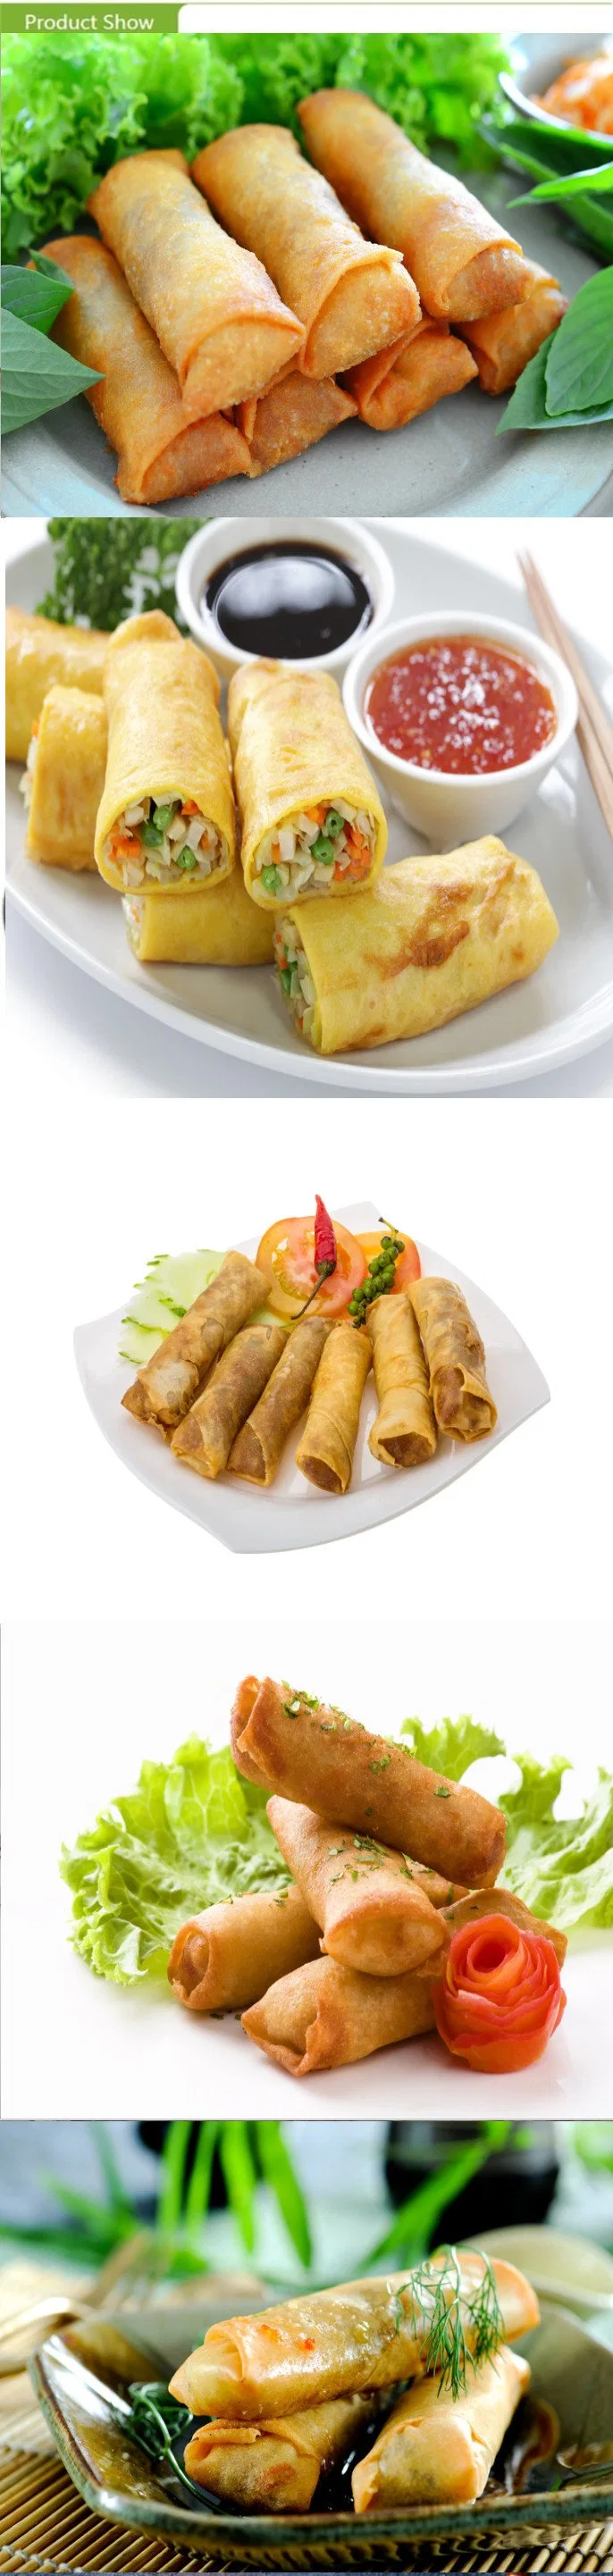 Chinese Frozen Pasta Frozen Fried Spring Rolls with Vegetables Stuffing